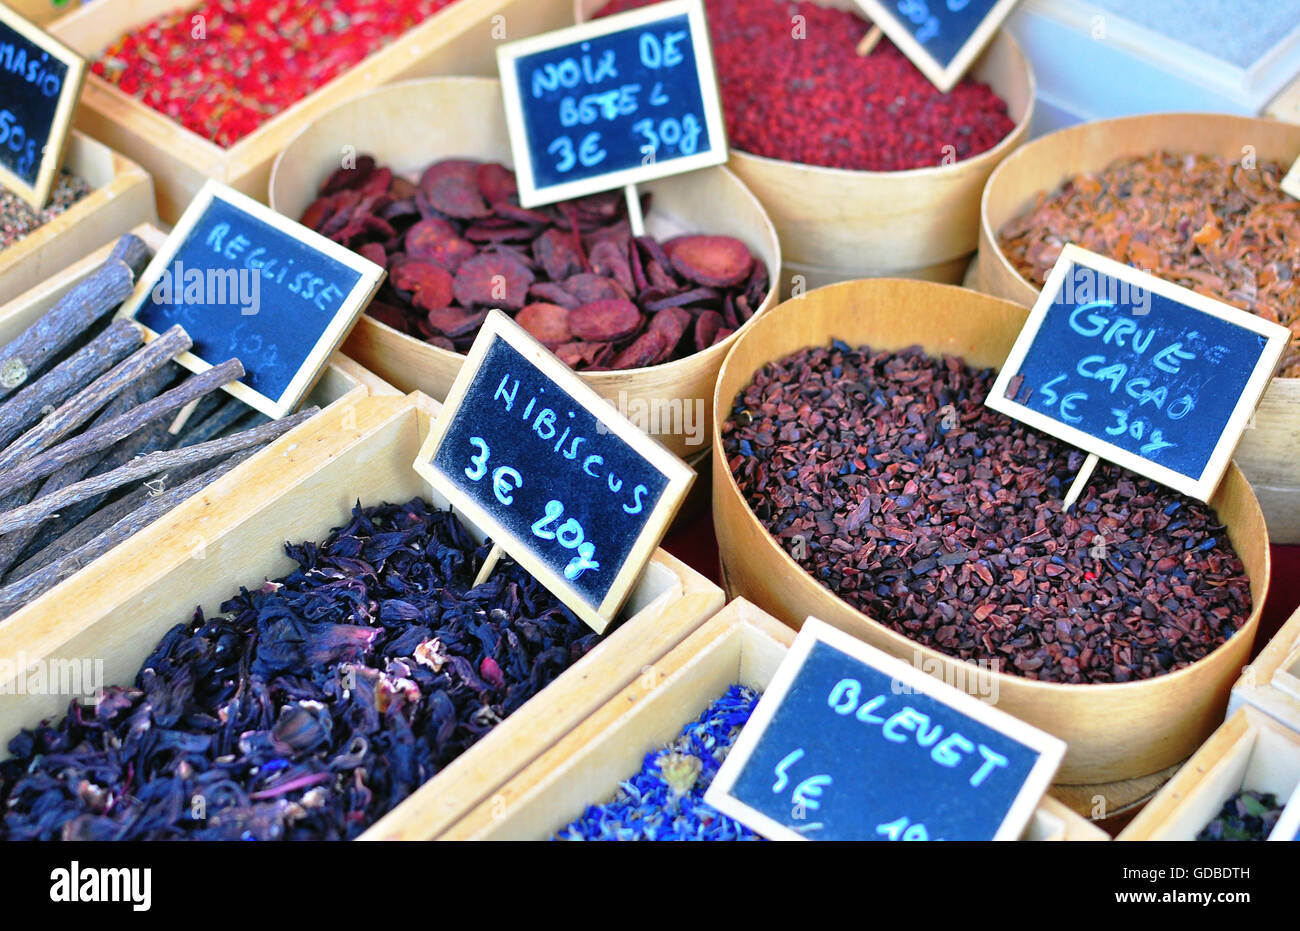 Spices, french food market Stock Photo